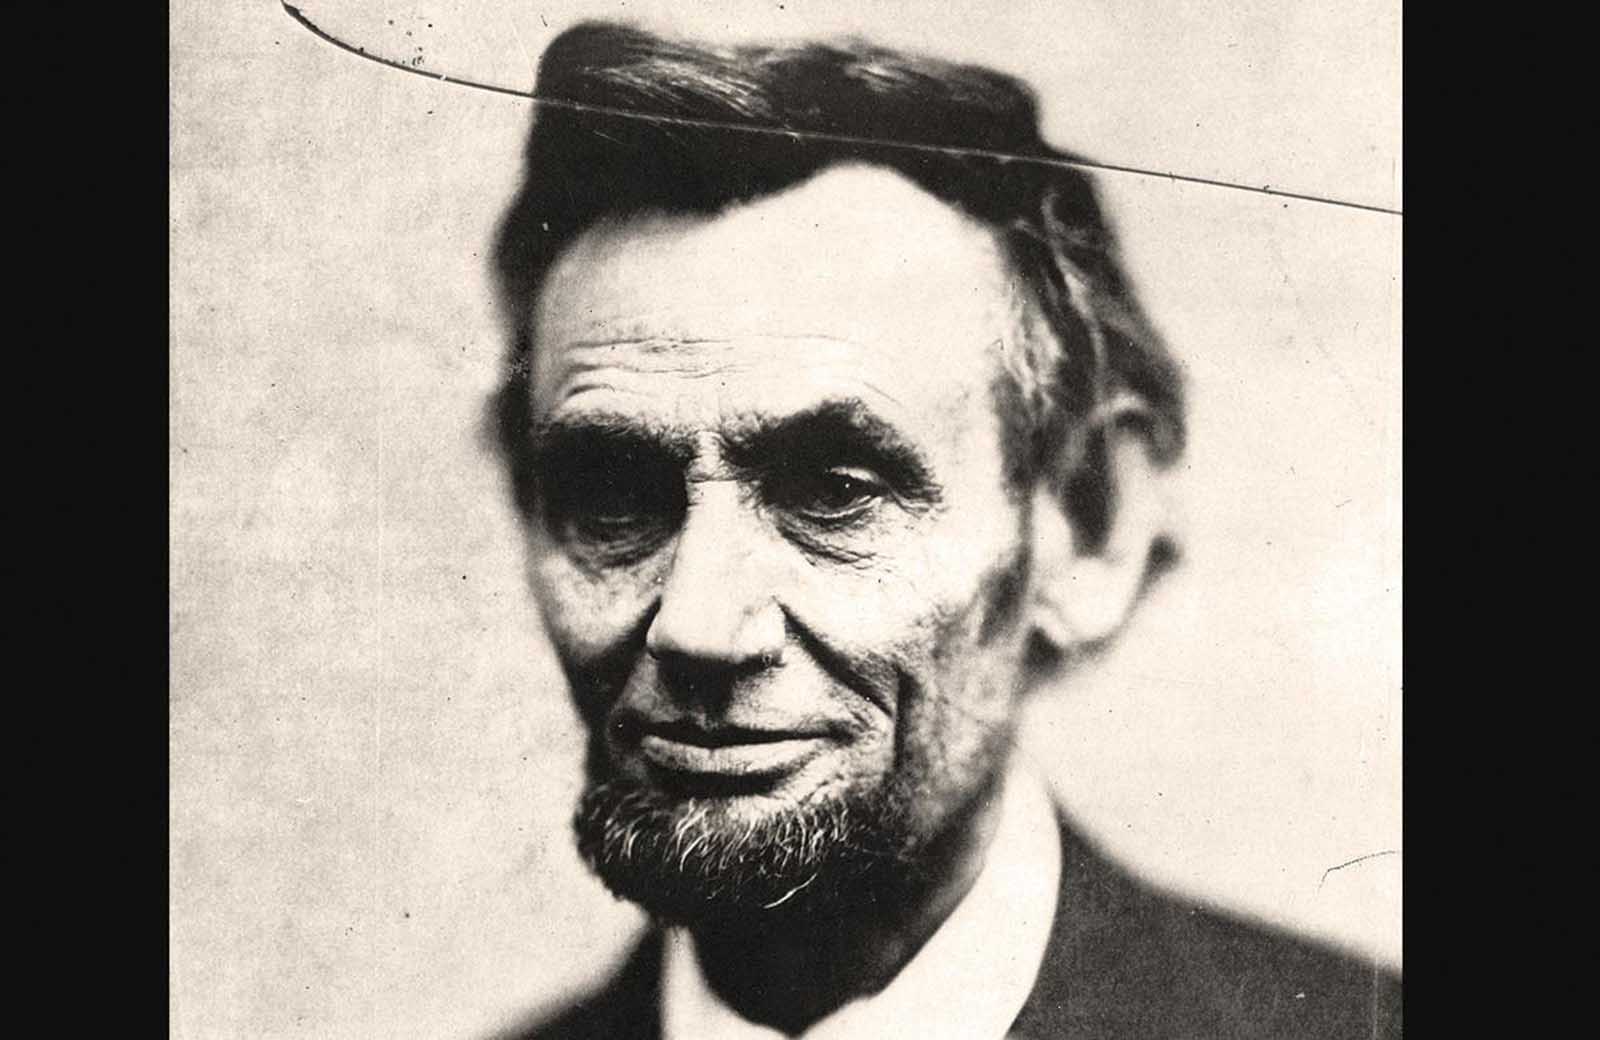 Abraham Lincoln, the 16th President of the United States, in a head-and-shoulders portrait taken by photographer Alexander Gardner on February 5, 1865. Traditionally called 